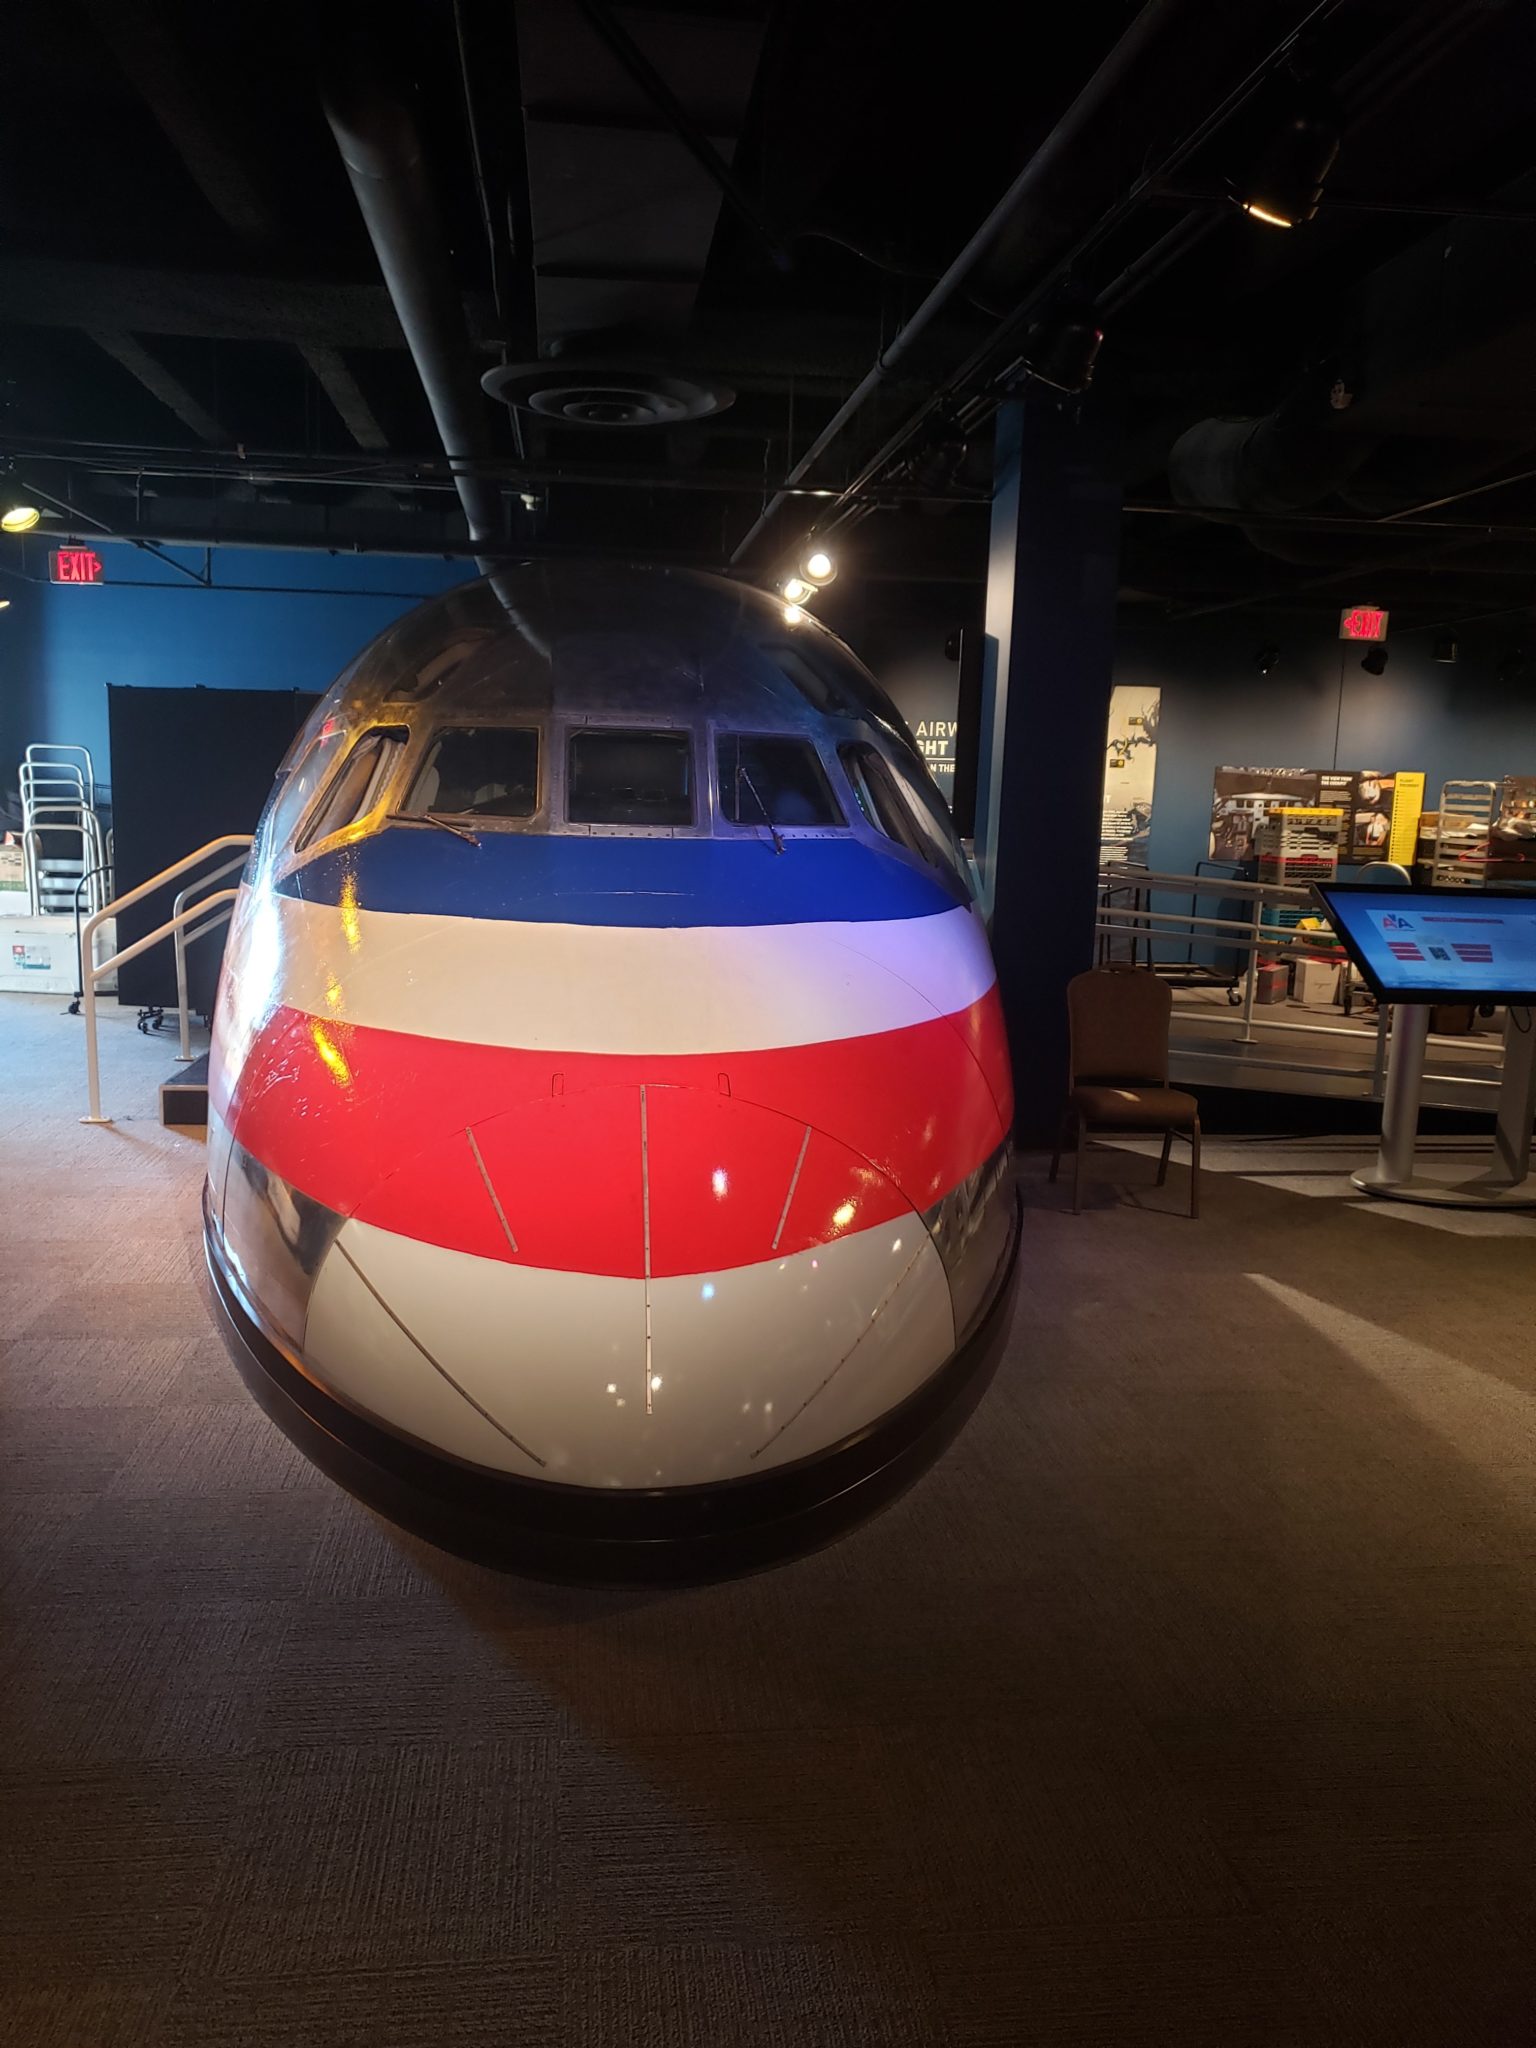 a plane in a museum